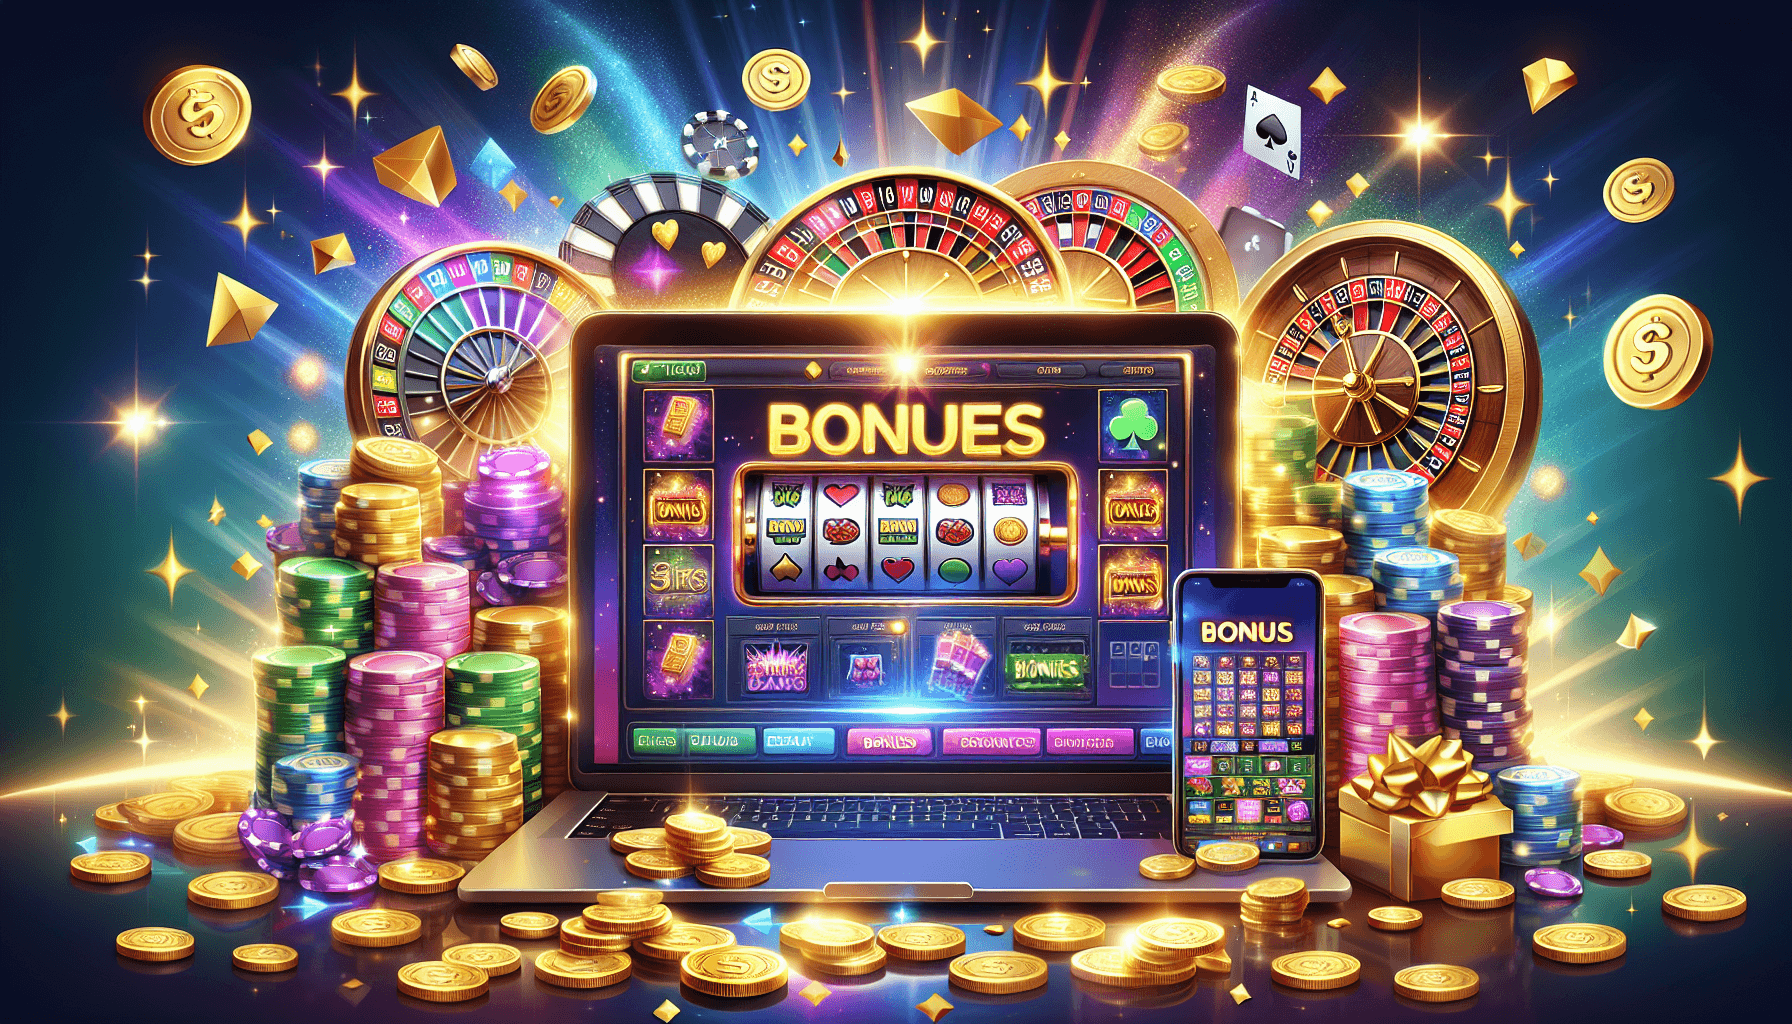 Best online casino bonuses and offers